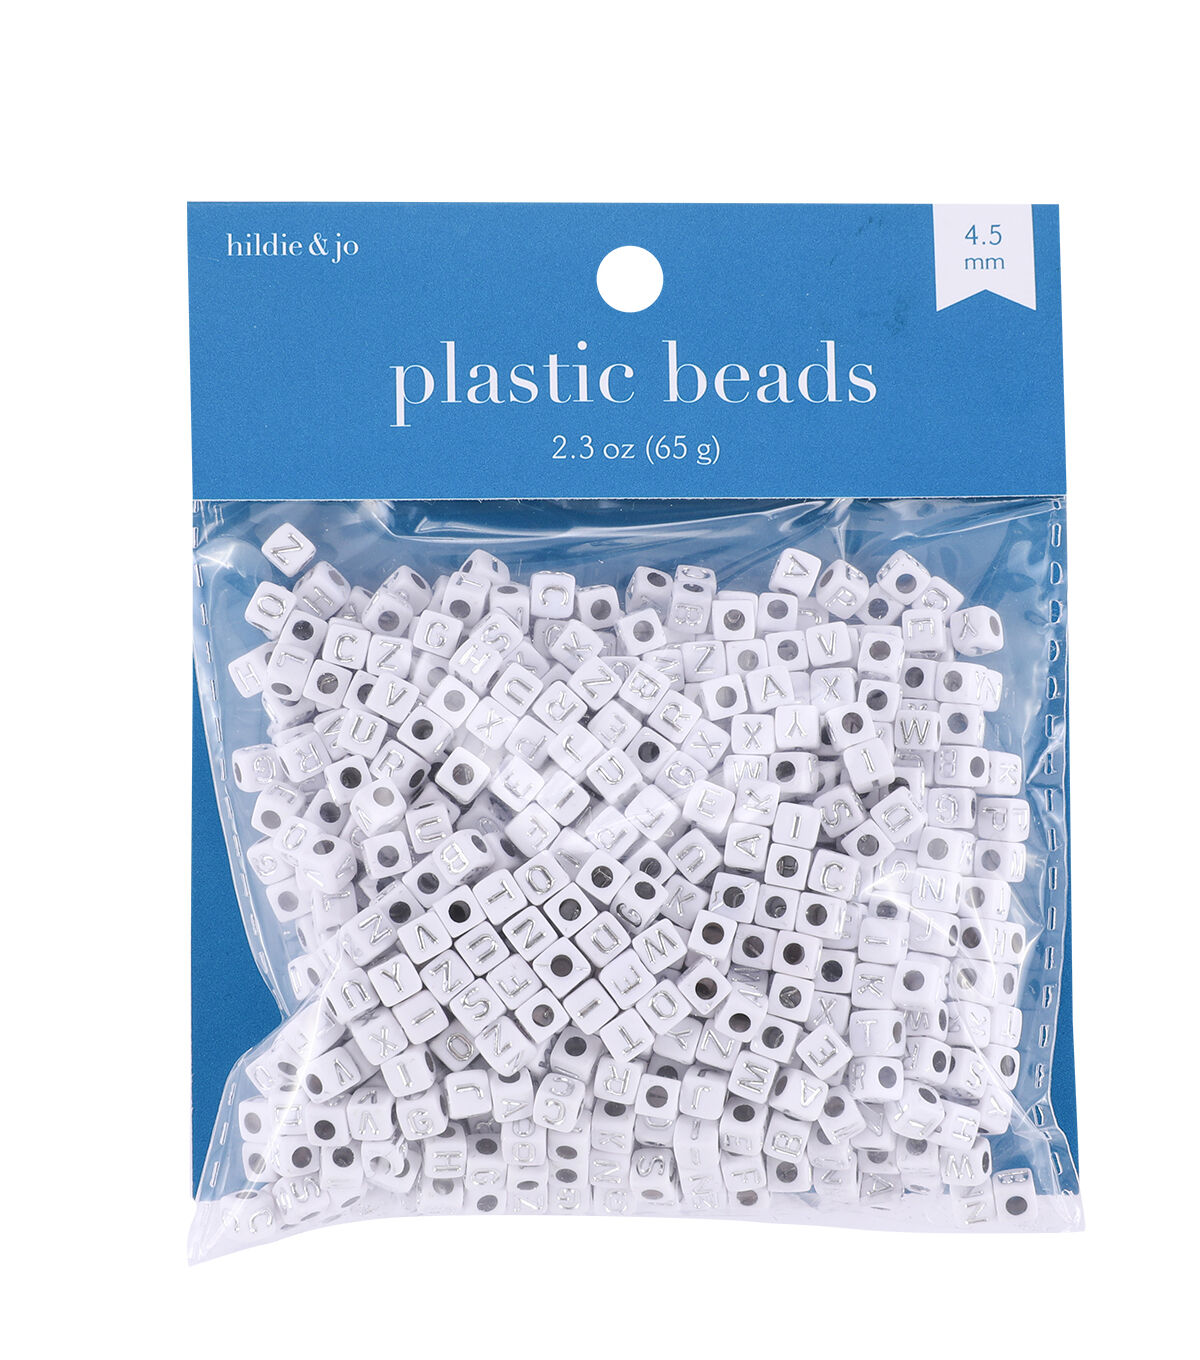 4.5mm Silver Letters on White Square Plastic Beads 2.3oz by hildie